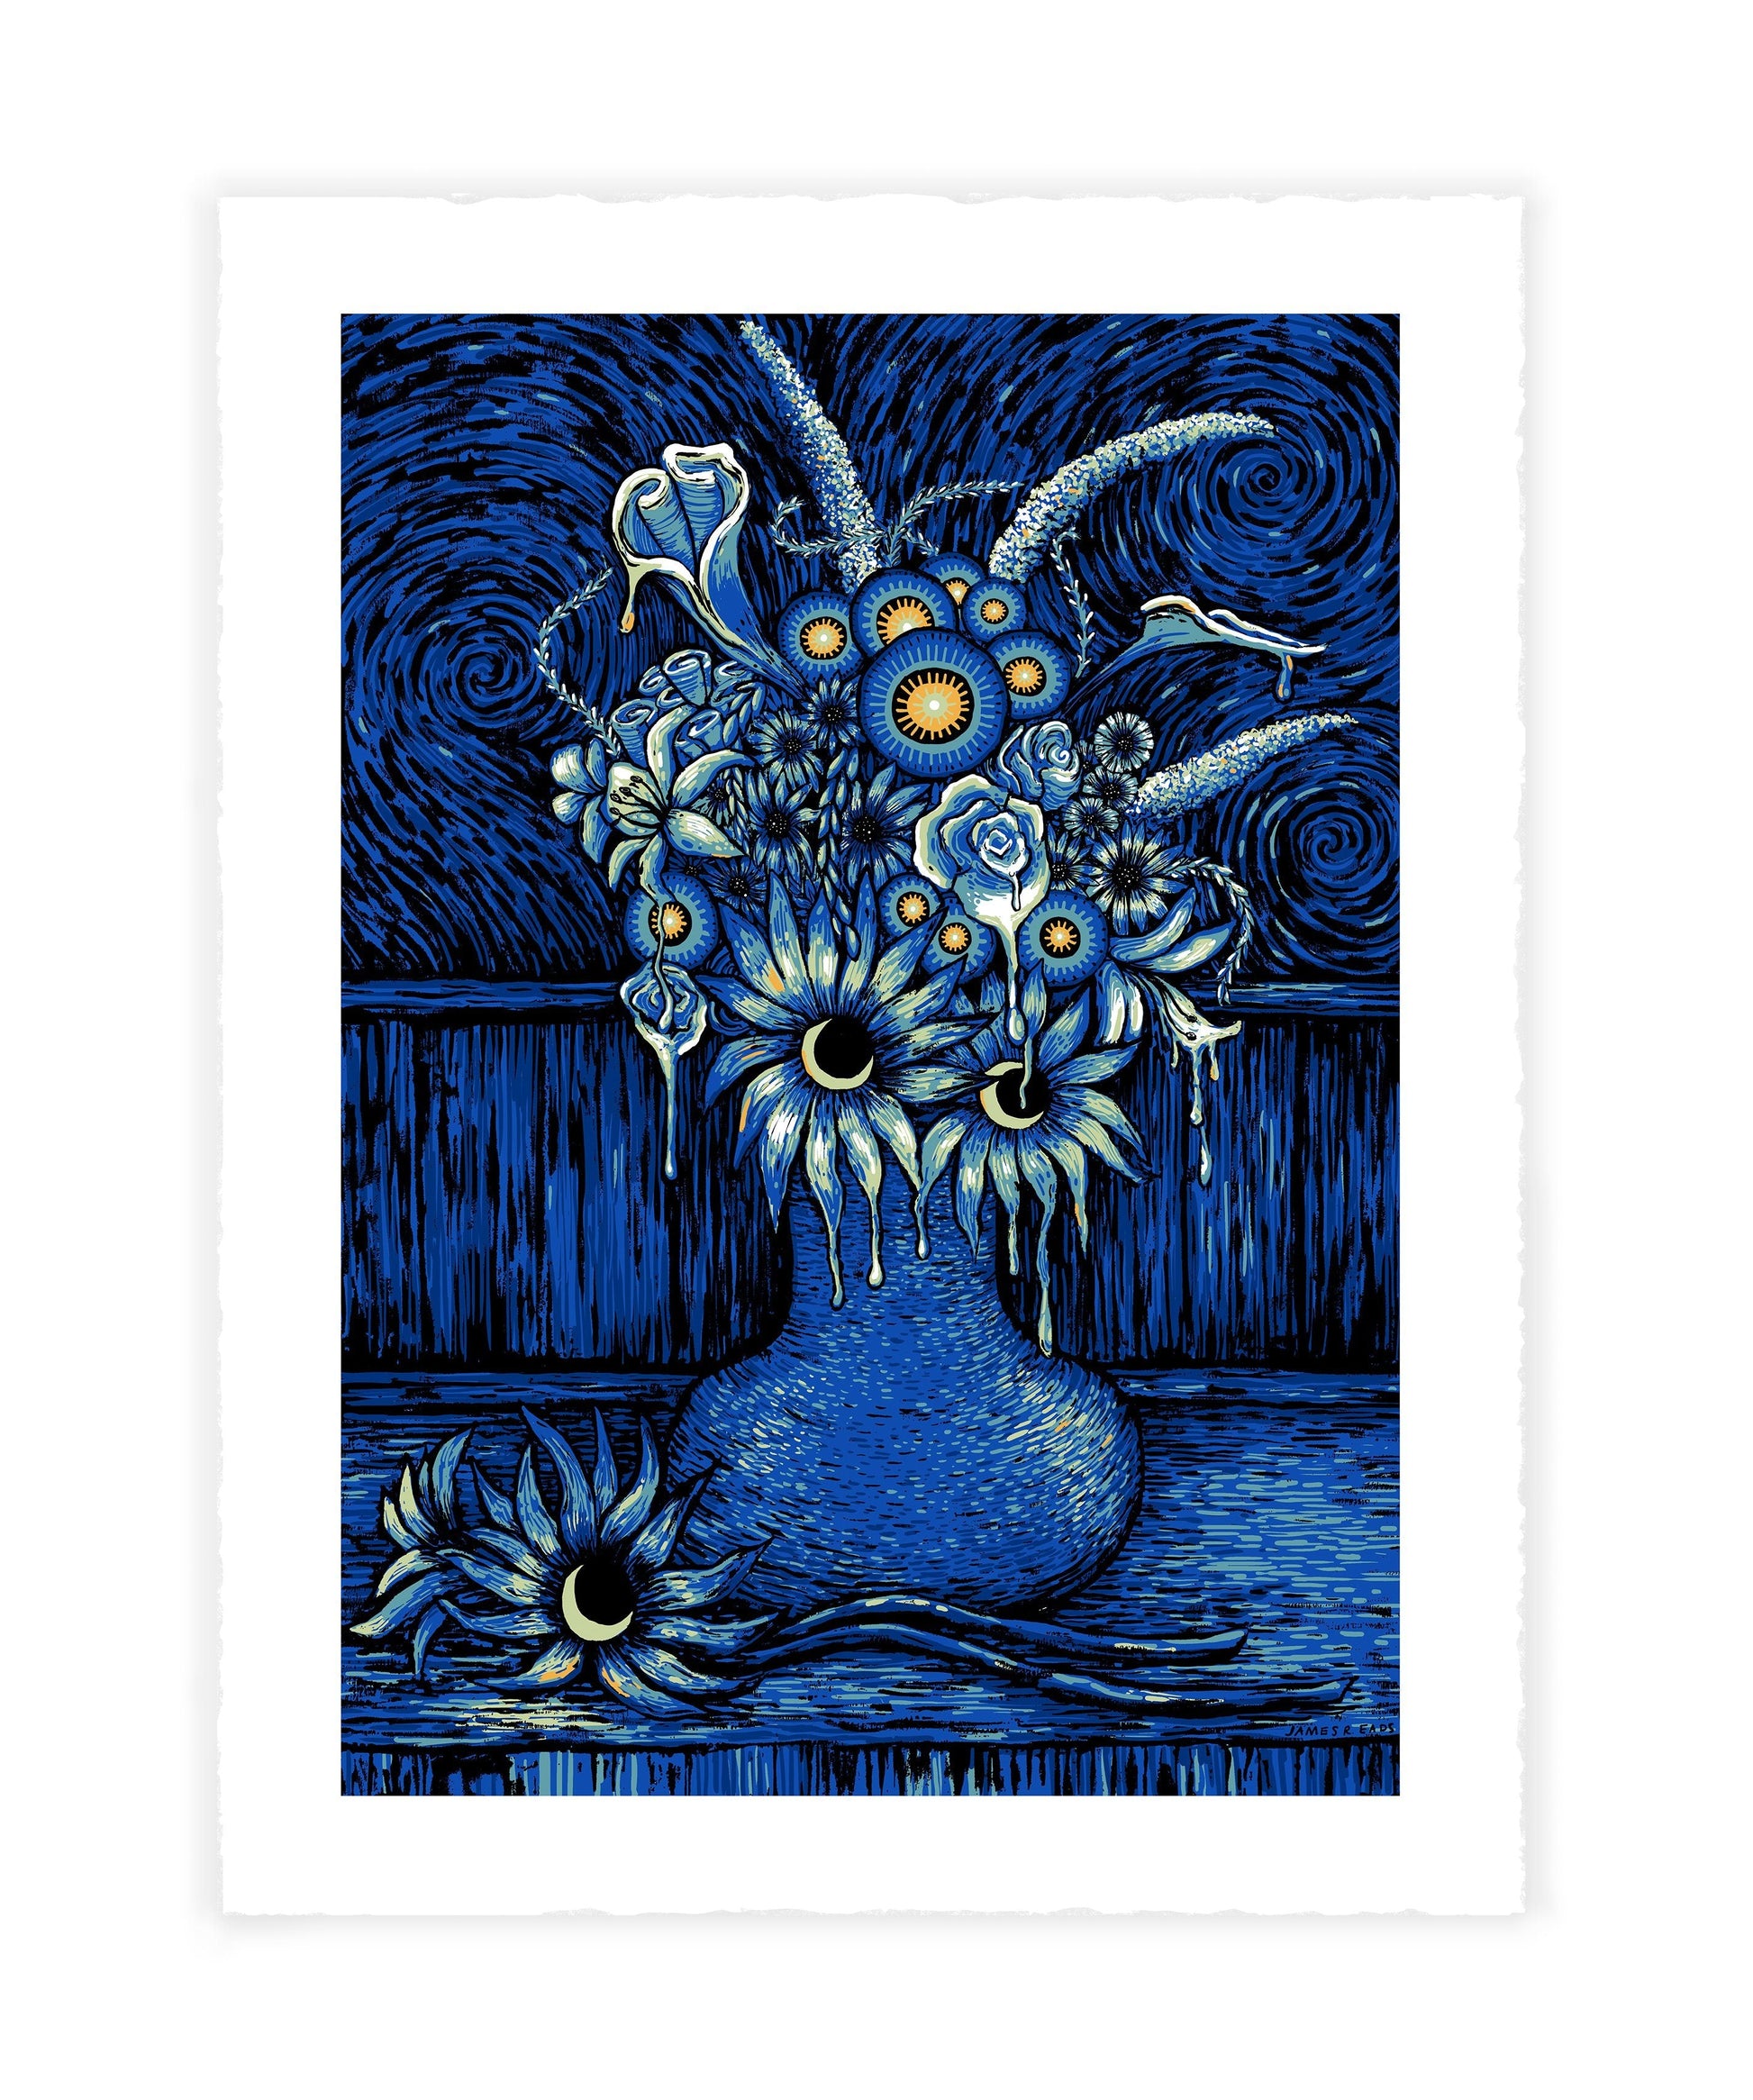 Moonflowers for Time Travelers (Limited Edition of 189) Print James R. Eads